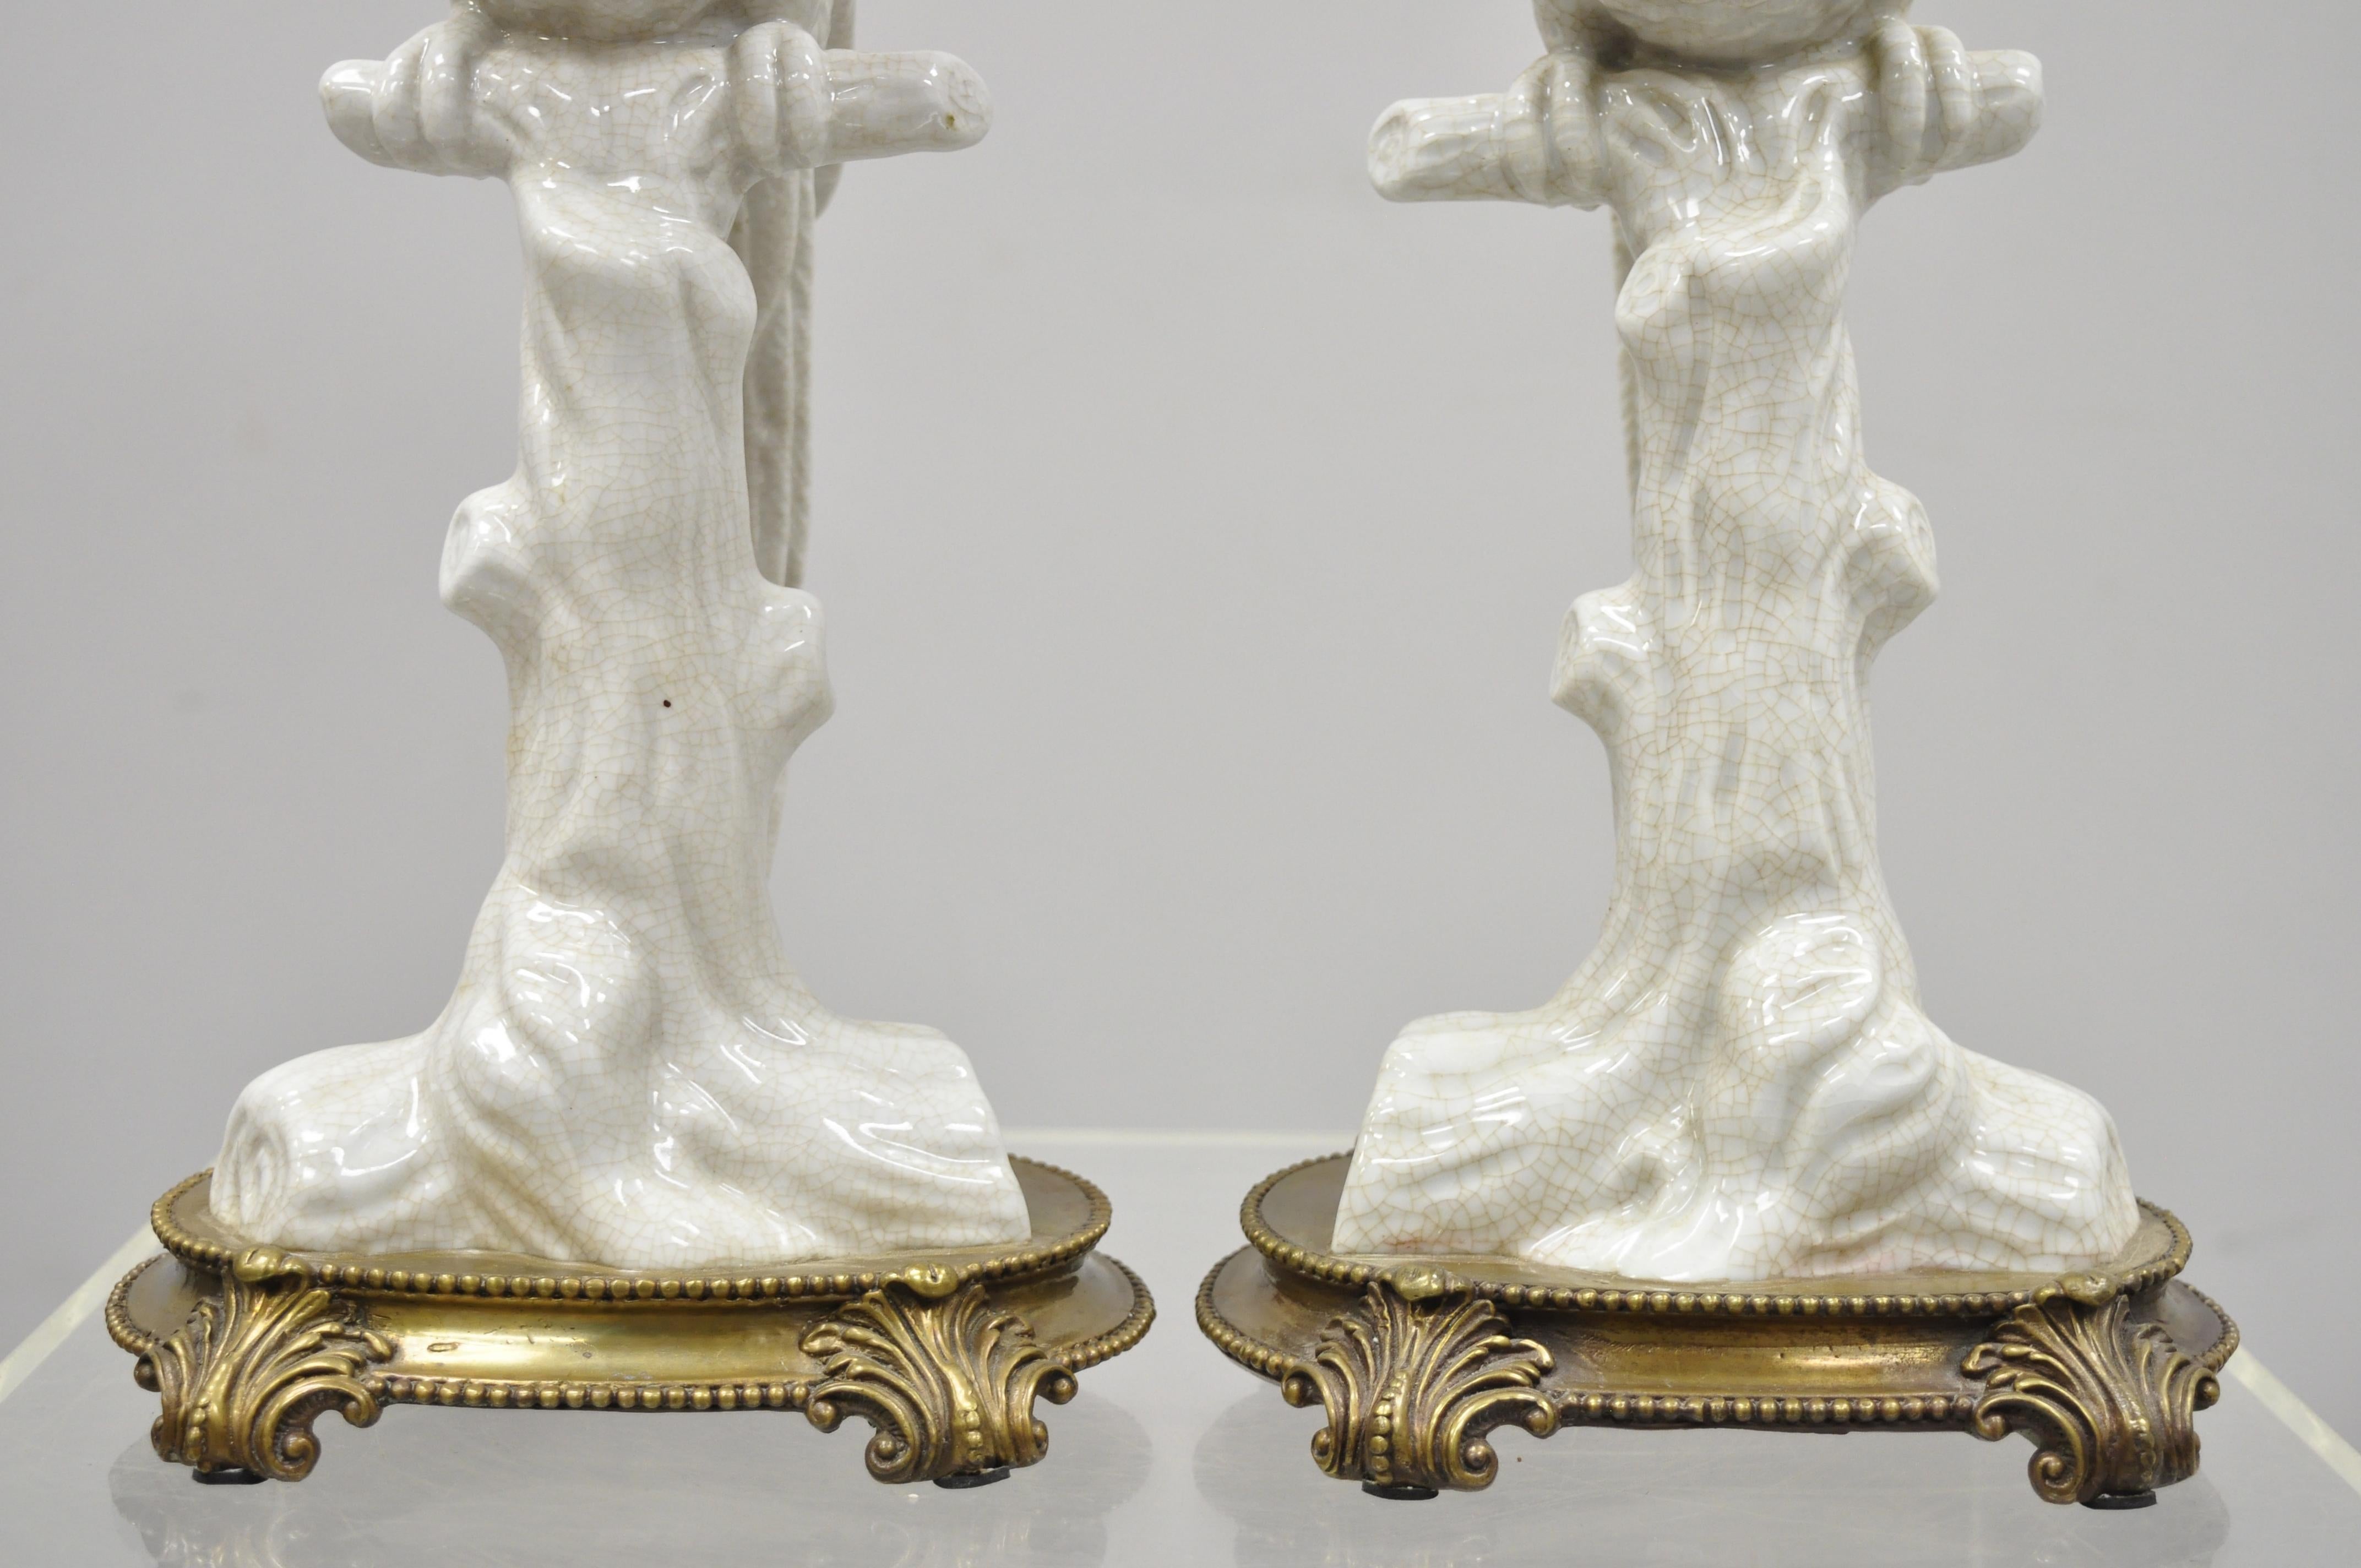 Pair of Porcelain & Bronze French Style White Parrot Candlestick Candle Holders 1